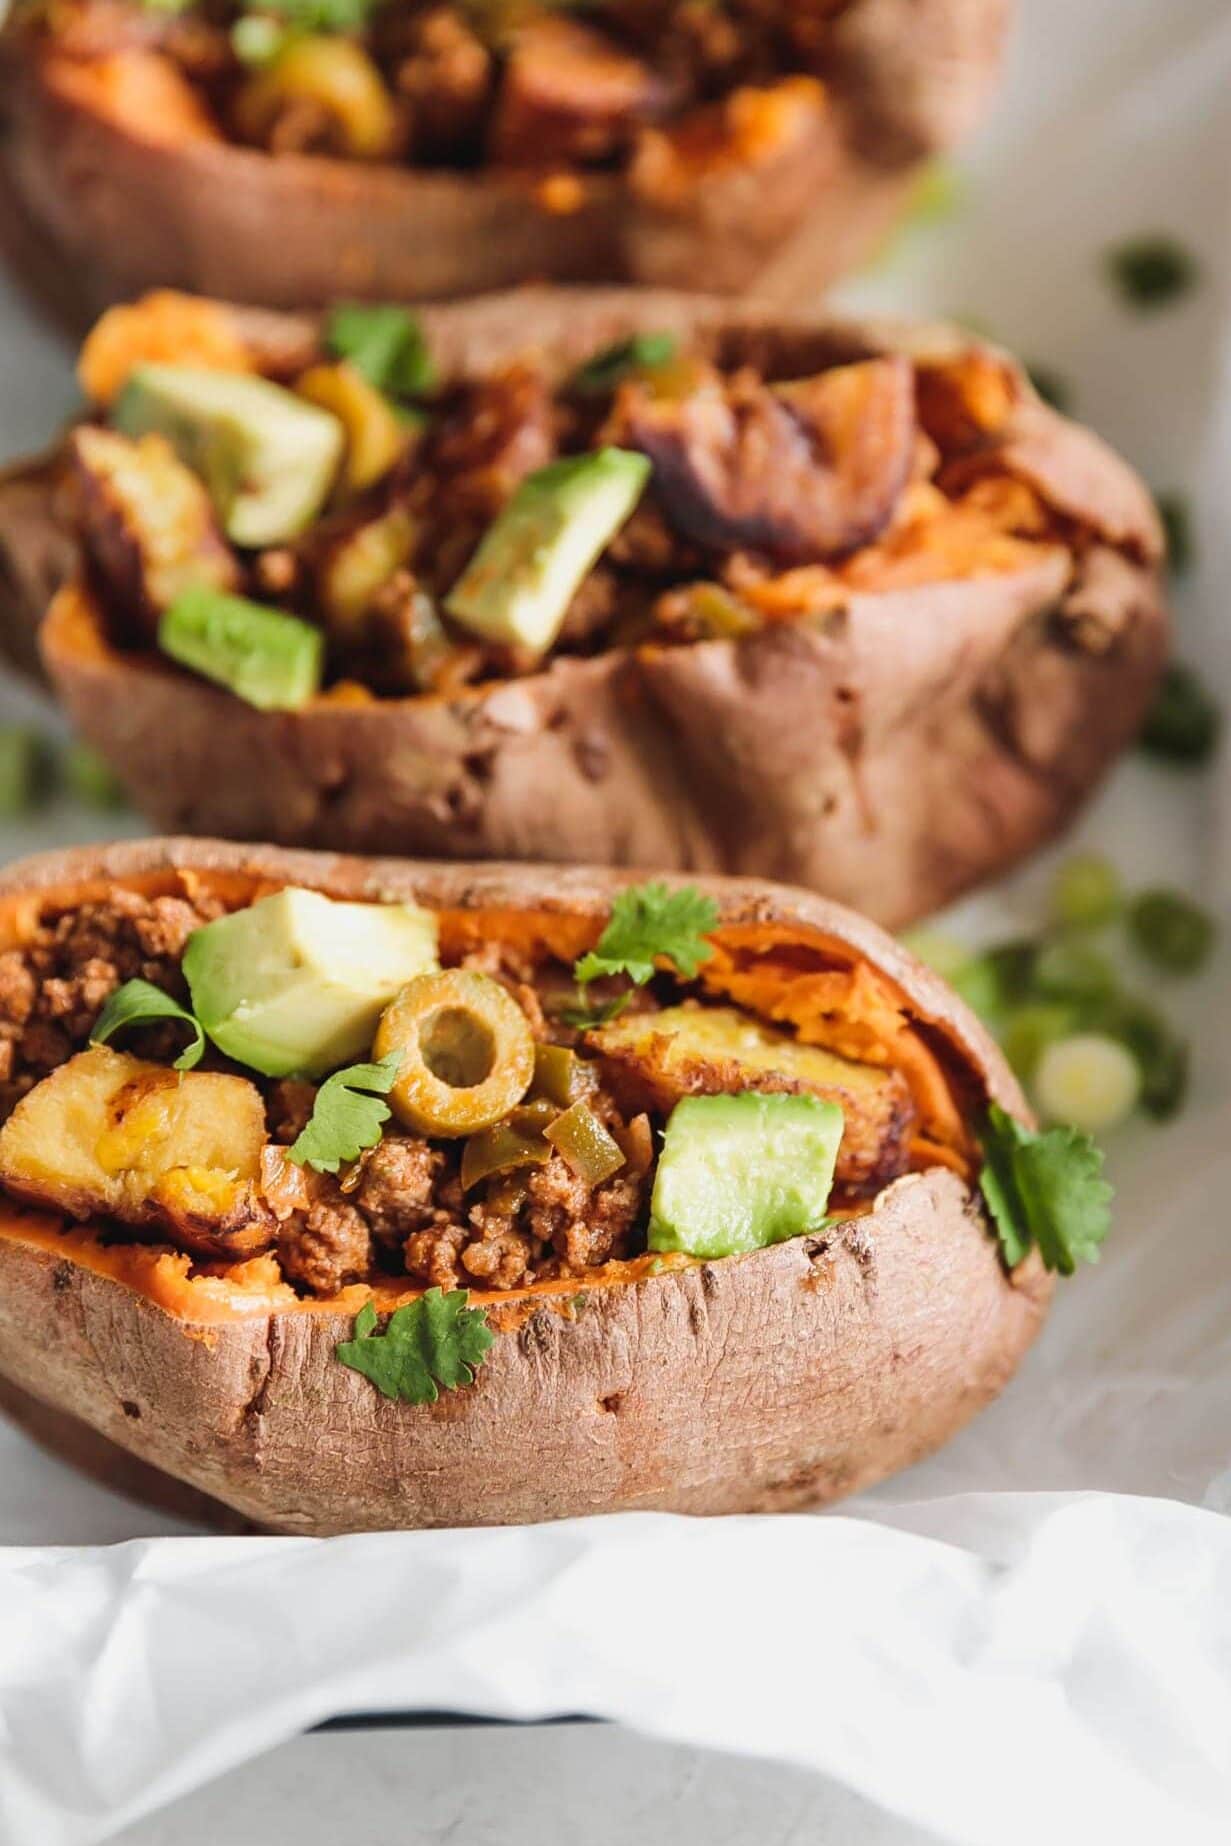 Sweet potatoes stuffed with Cuban-style lean ground beef, chopped sweet plantains, and avocado. A flavorful, easy-to-make 35-minute meal for busy weeknights!